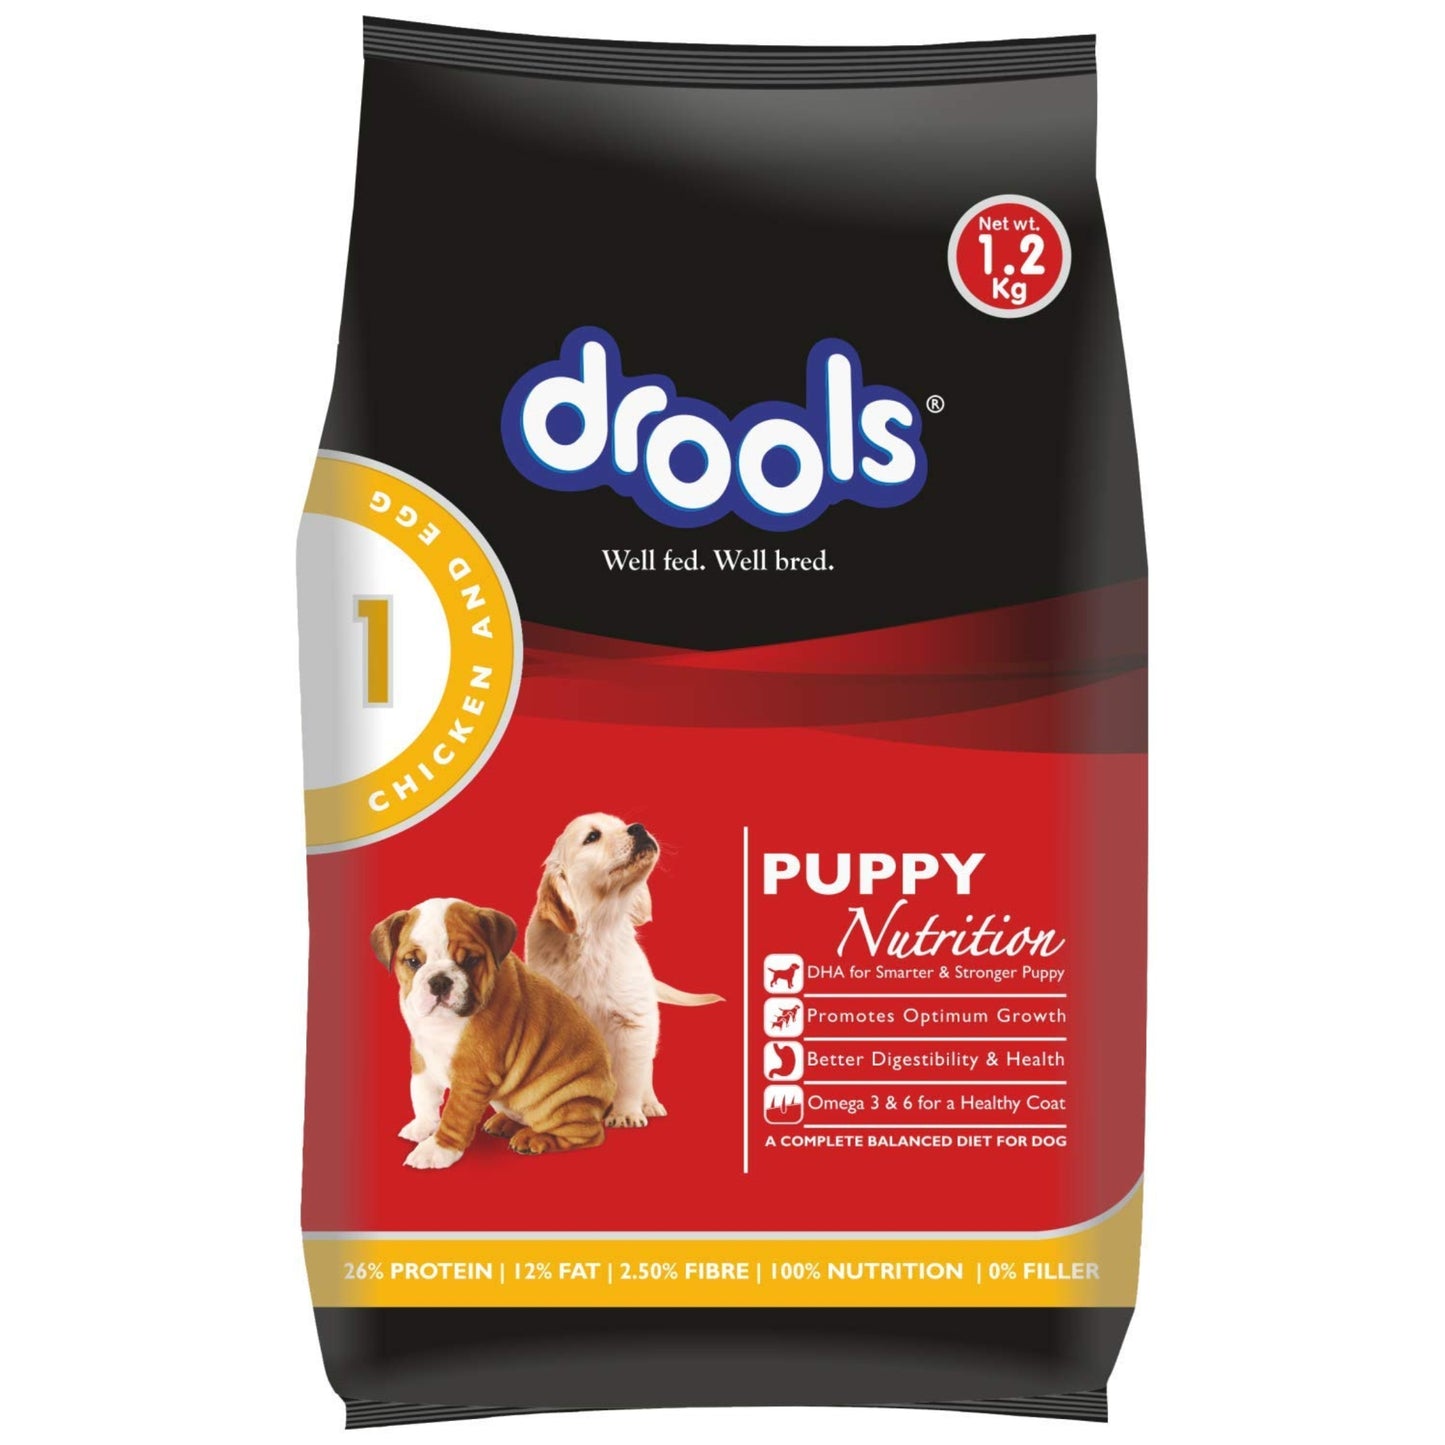 Drools Puppy Dry Dog Food, Chicken and Egg, 1.2kg